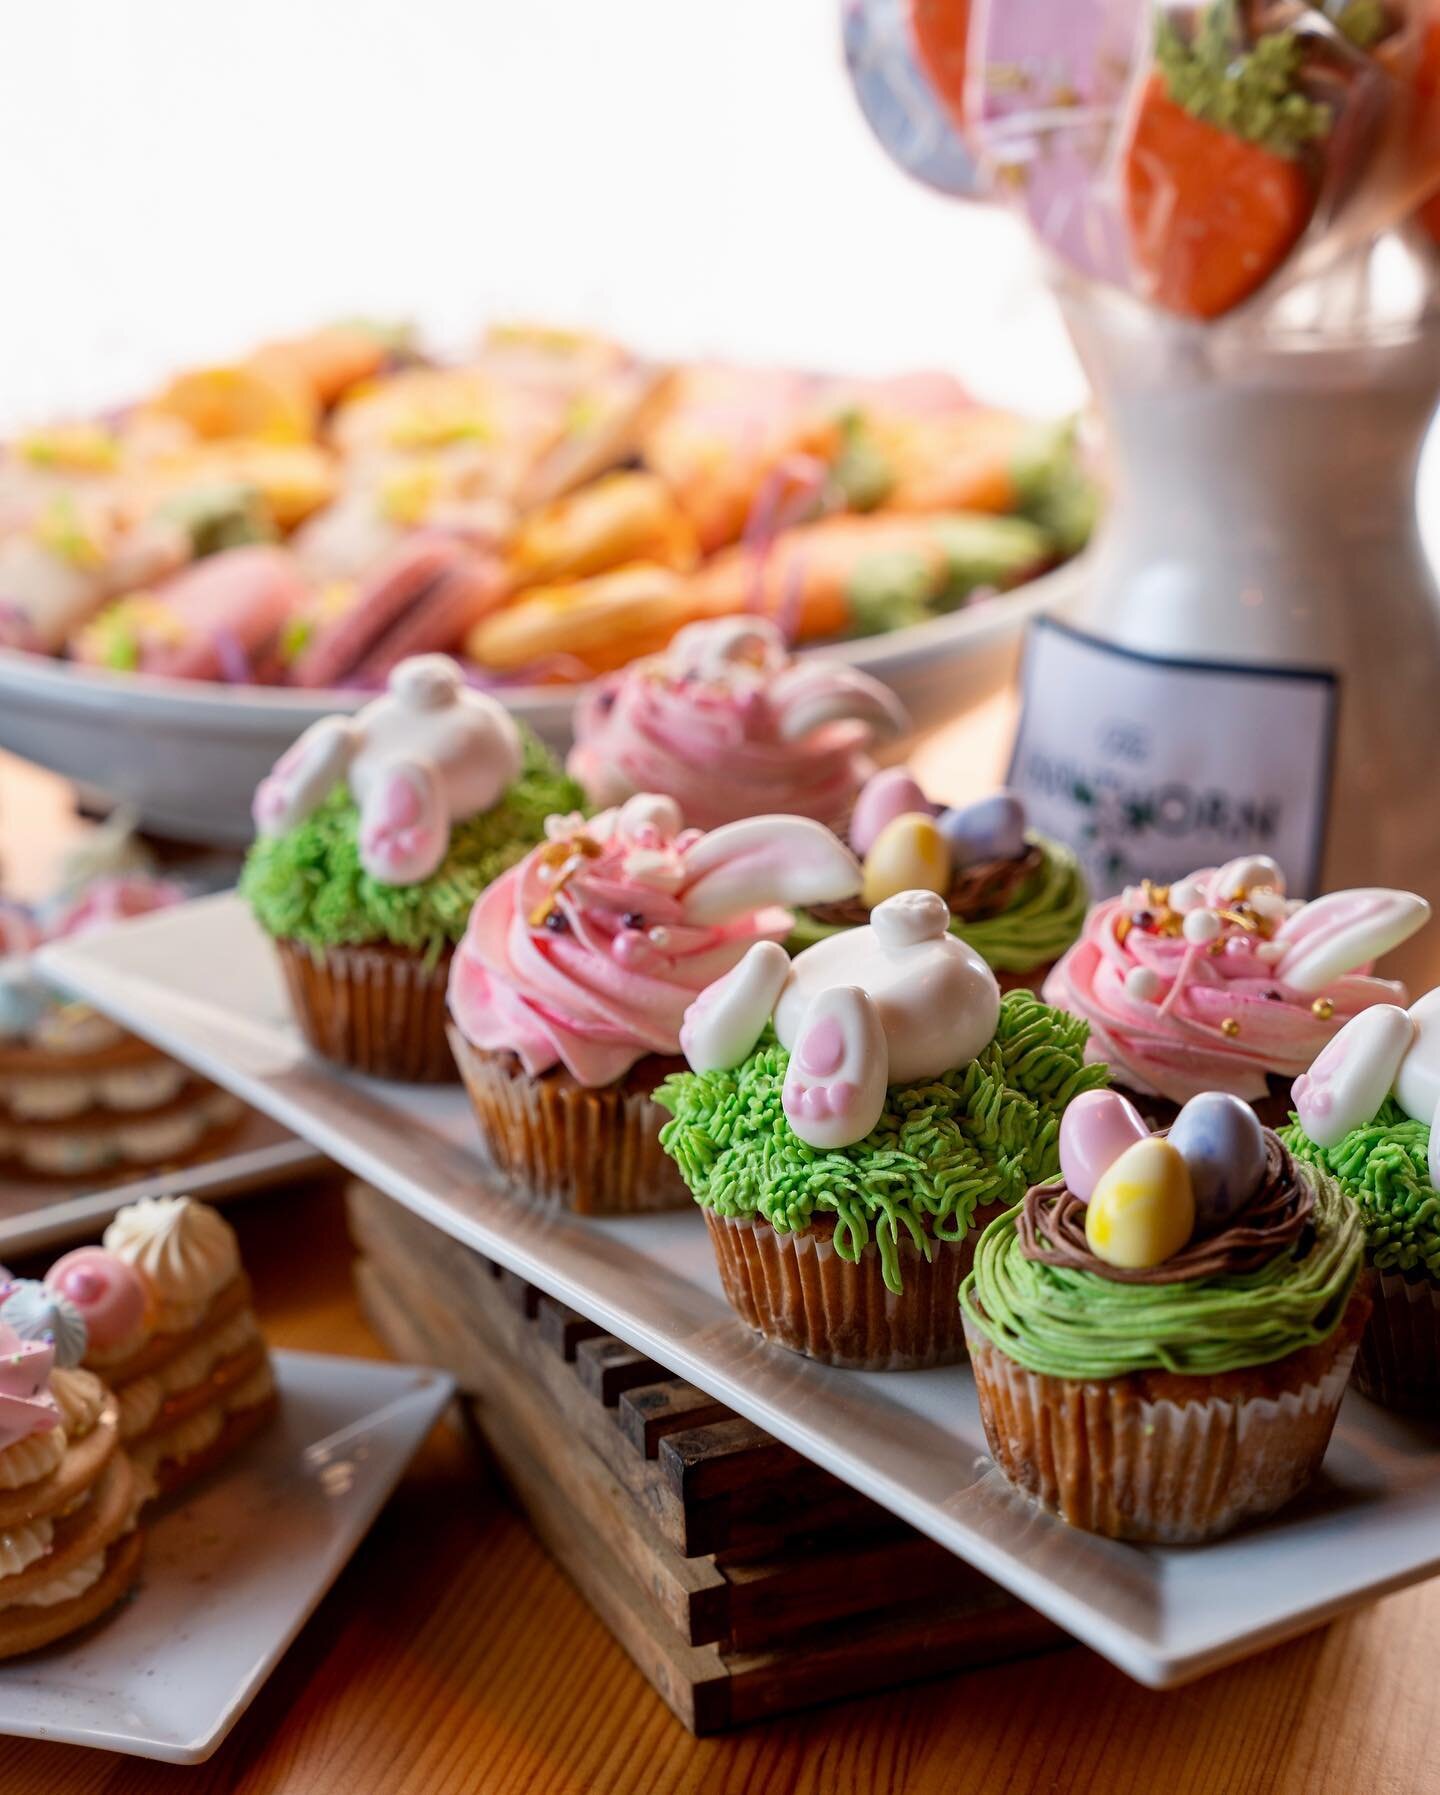 Starting today until Sunday, our cases are filled with new Easter Treats! You don&rsquo;t want to miss out on these delicious Cupcakes, Cookie Stacks, and Macarons. Stop by and try all of these amazing creations from our incredibly talented Pastry Ch